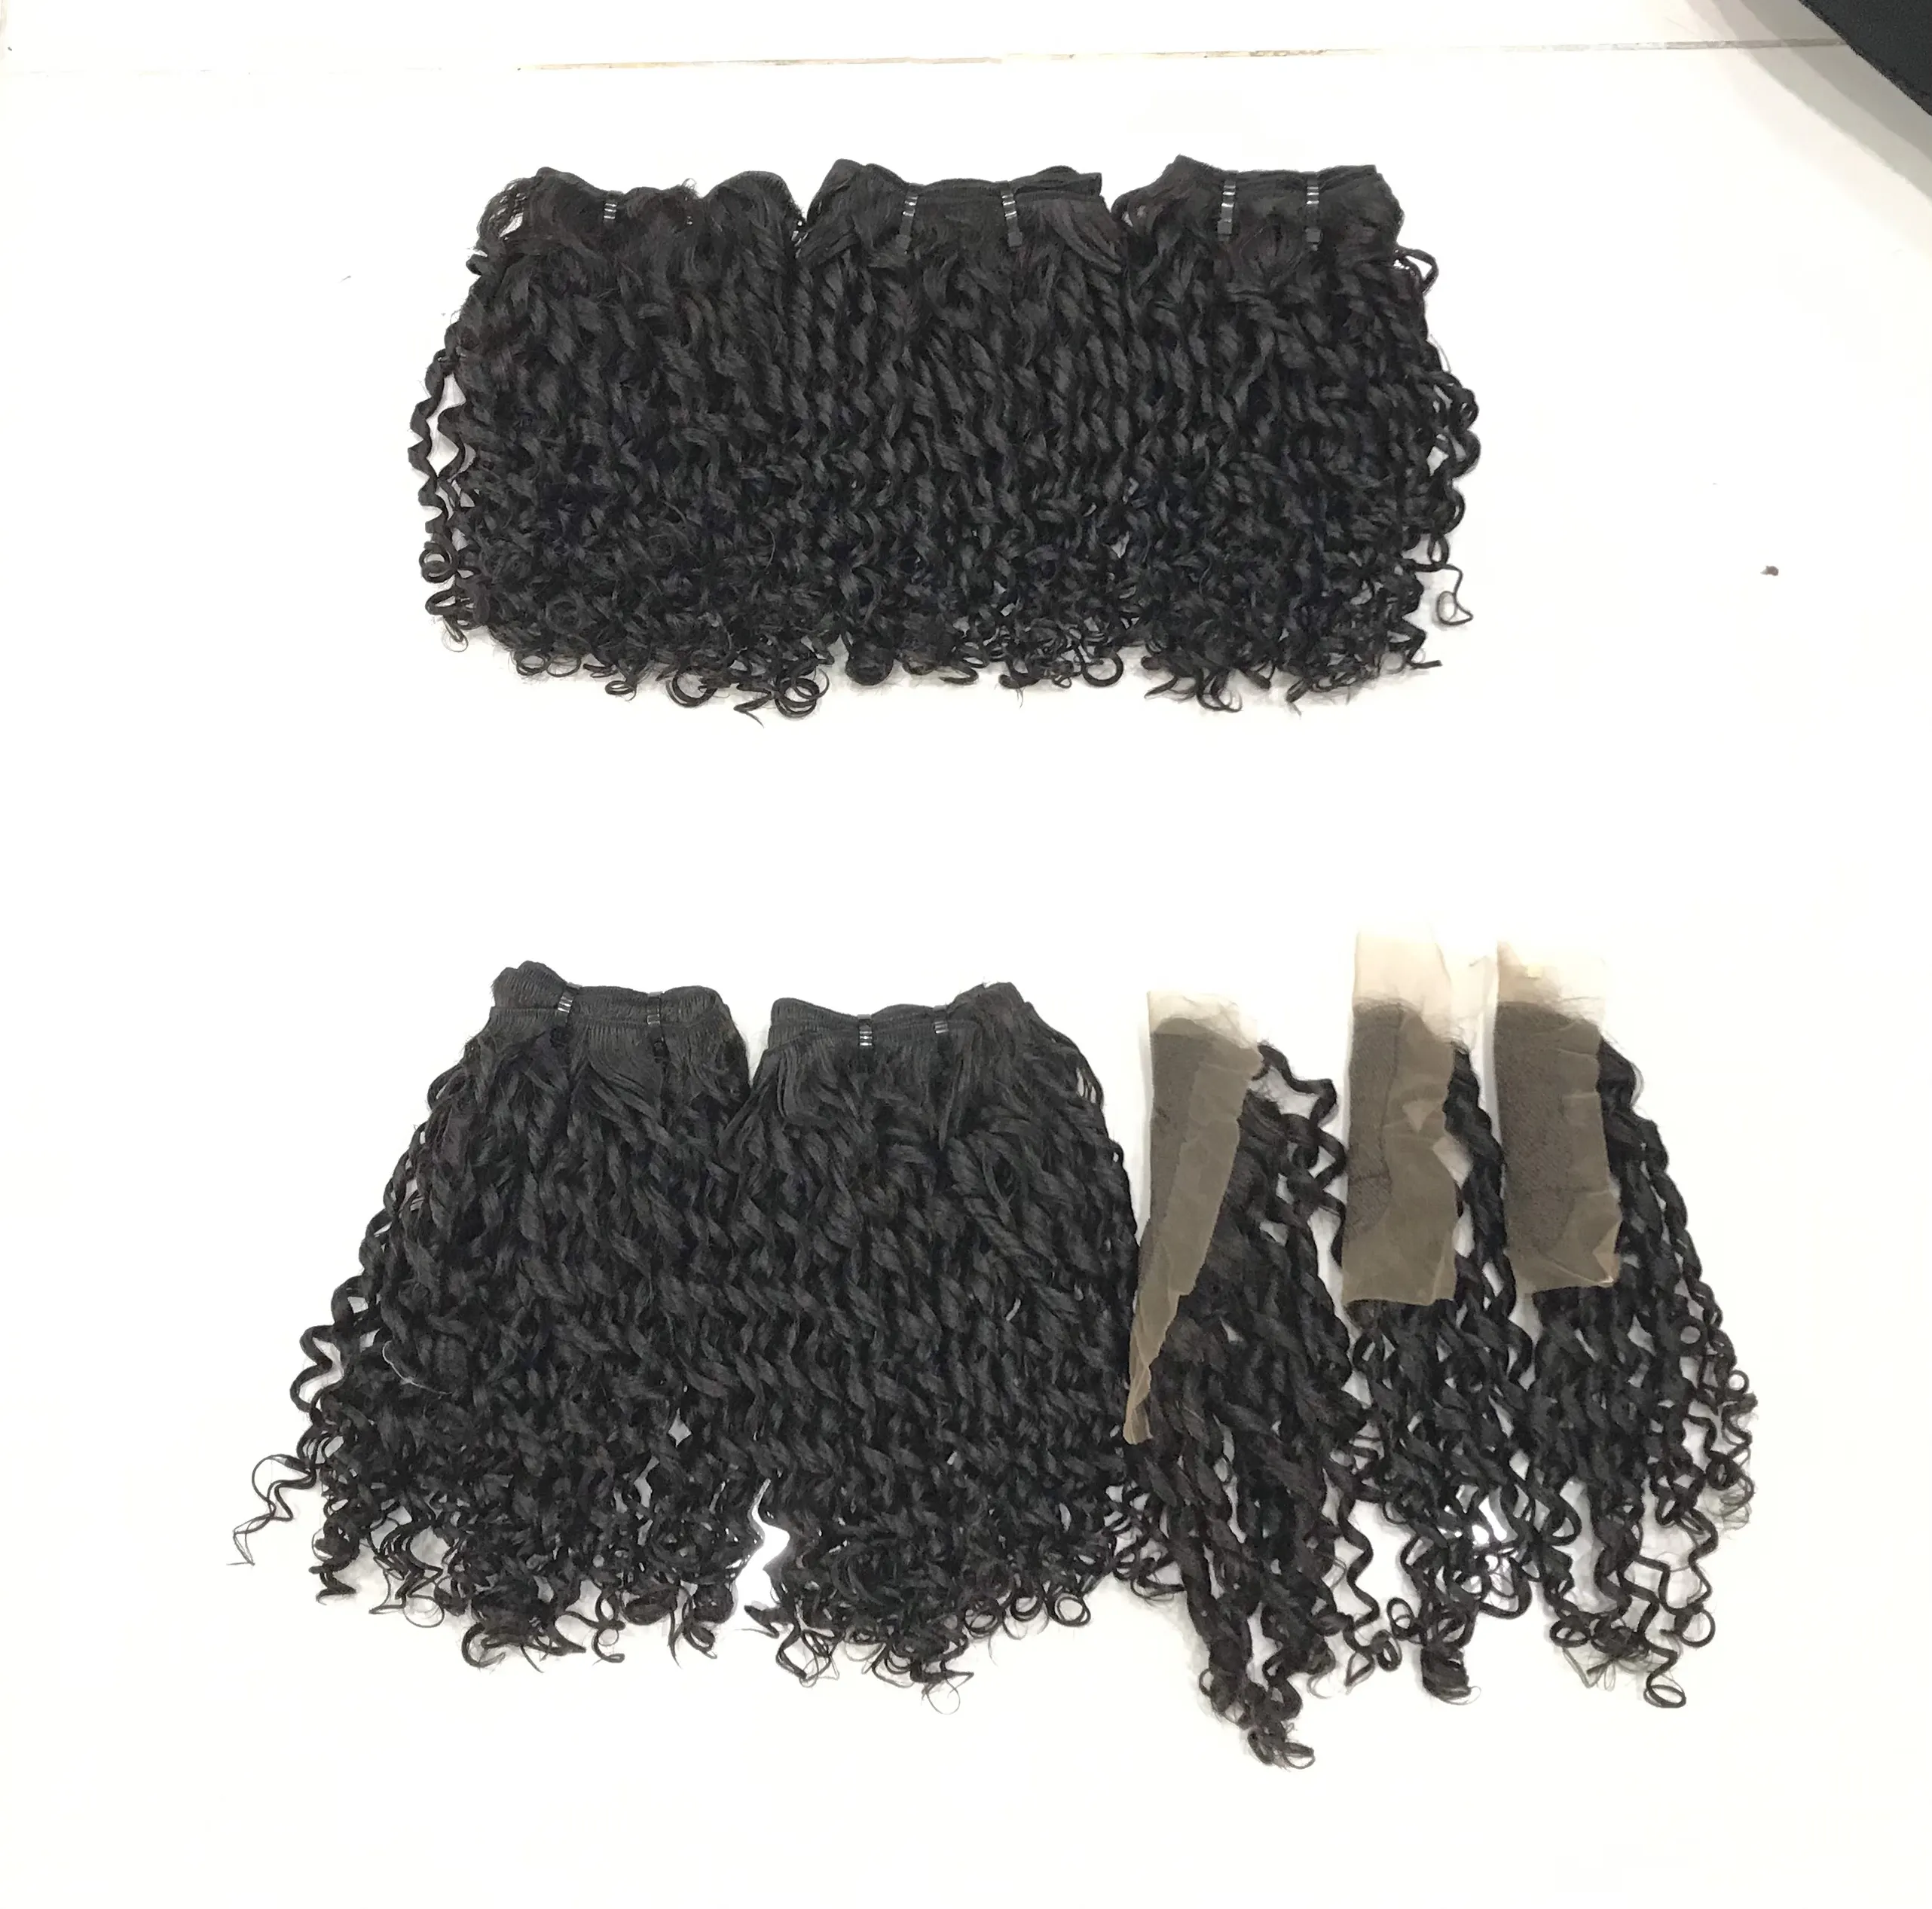 18 Oct 2021 Top Choice Hottest Product Human Curly Hair Brush Bundles With Closure And Welf Hair Extension